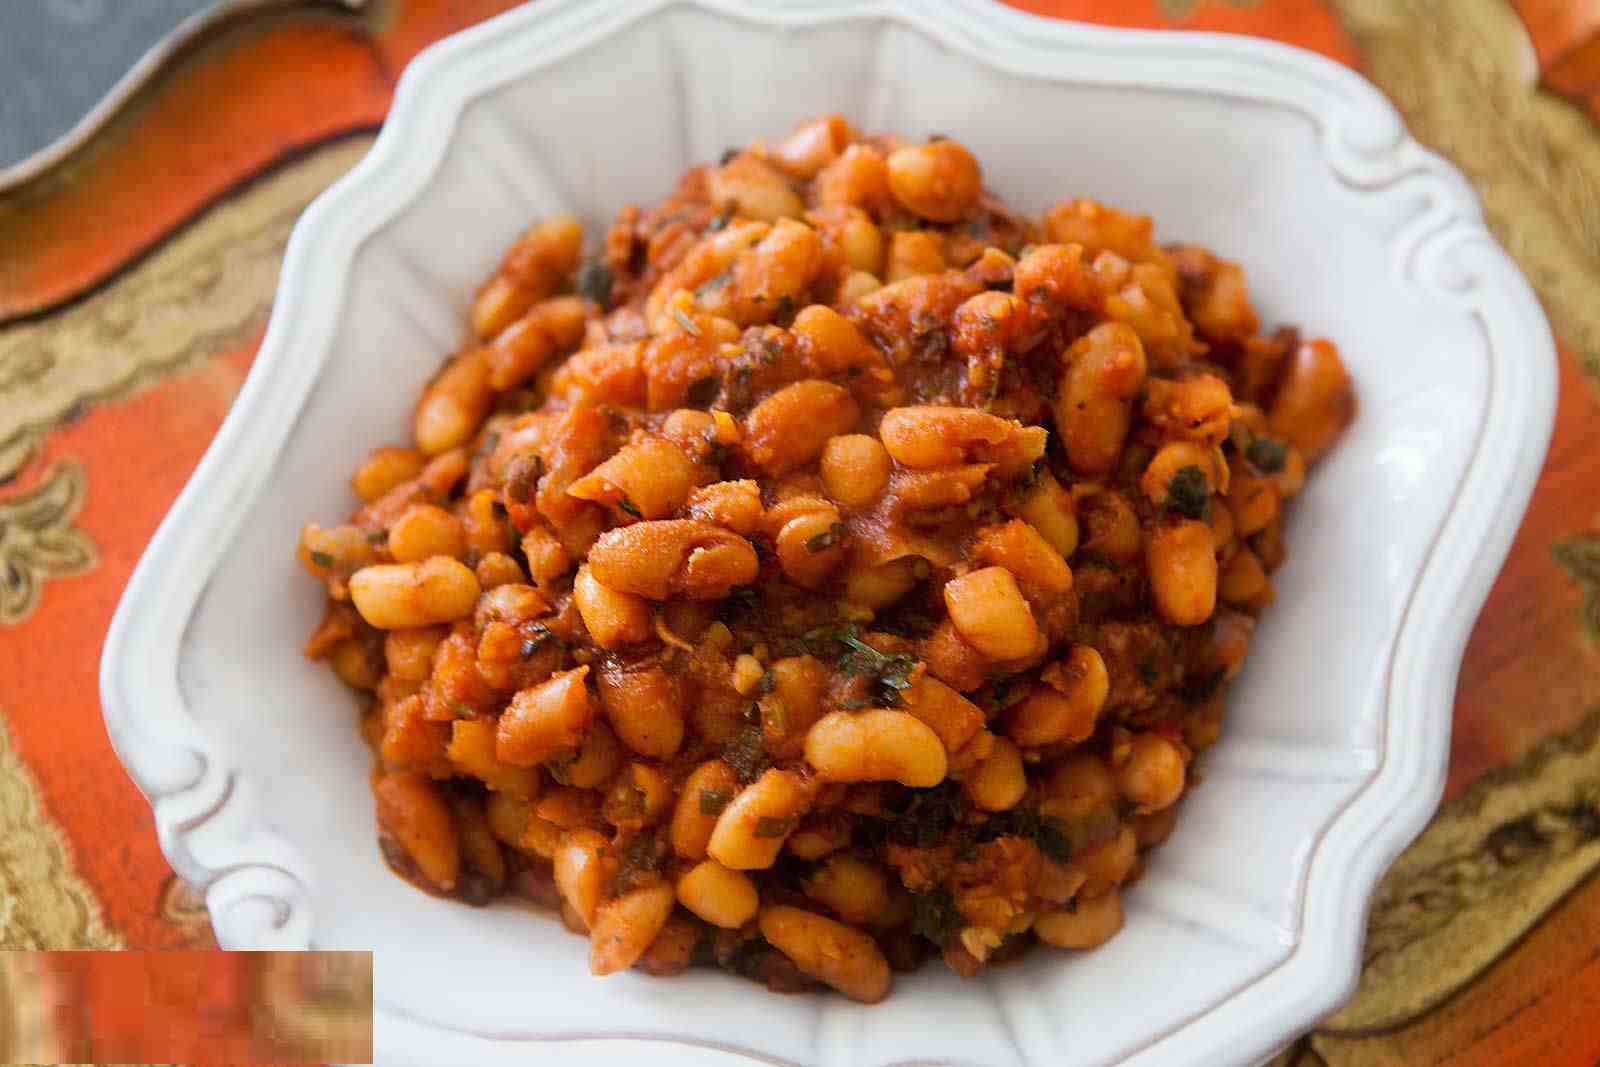 Buy All Kinds of baked beans At The Best Price